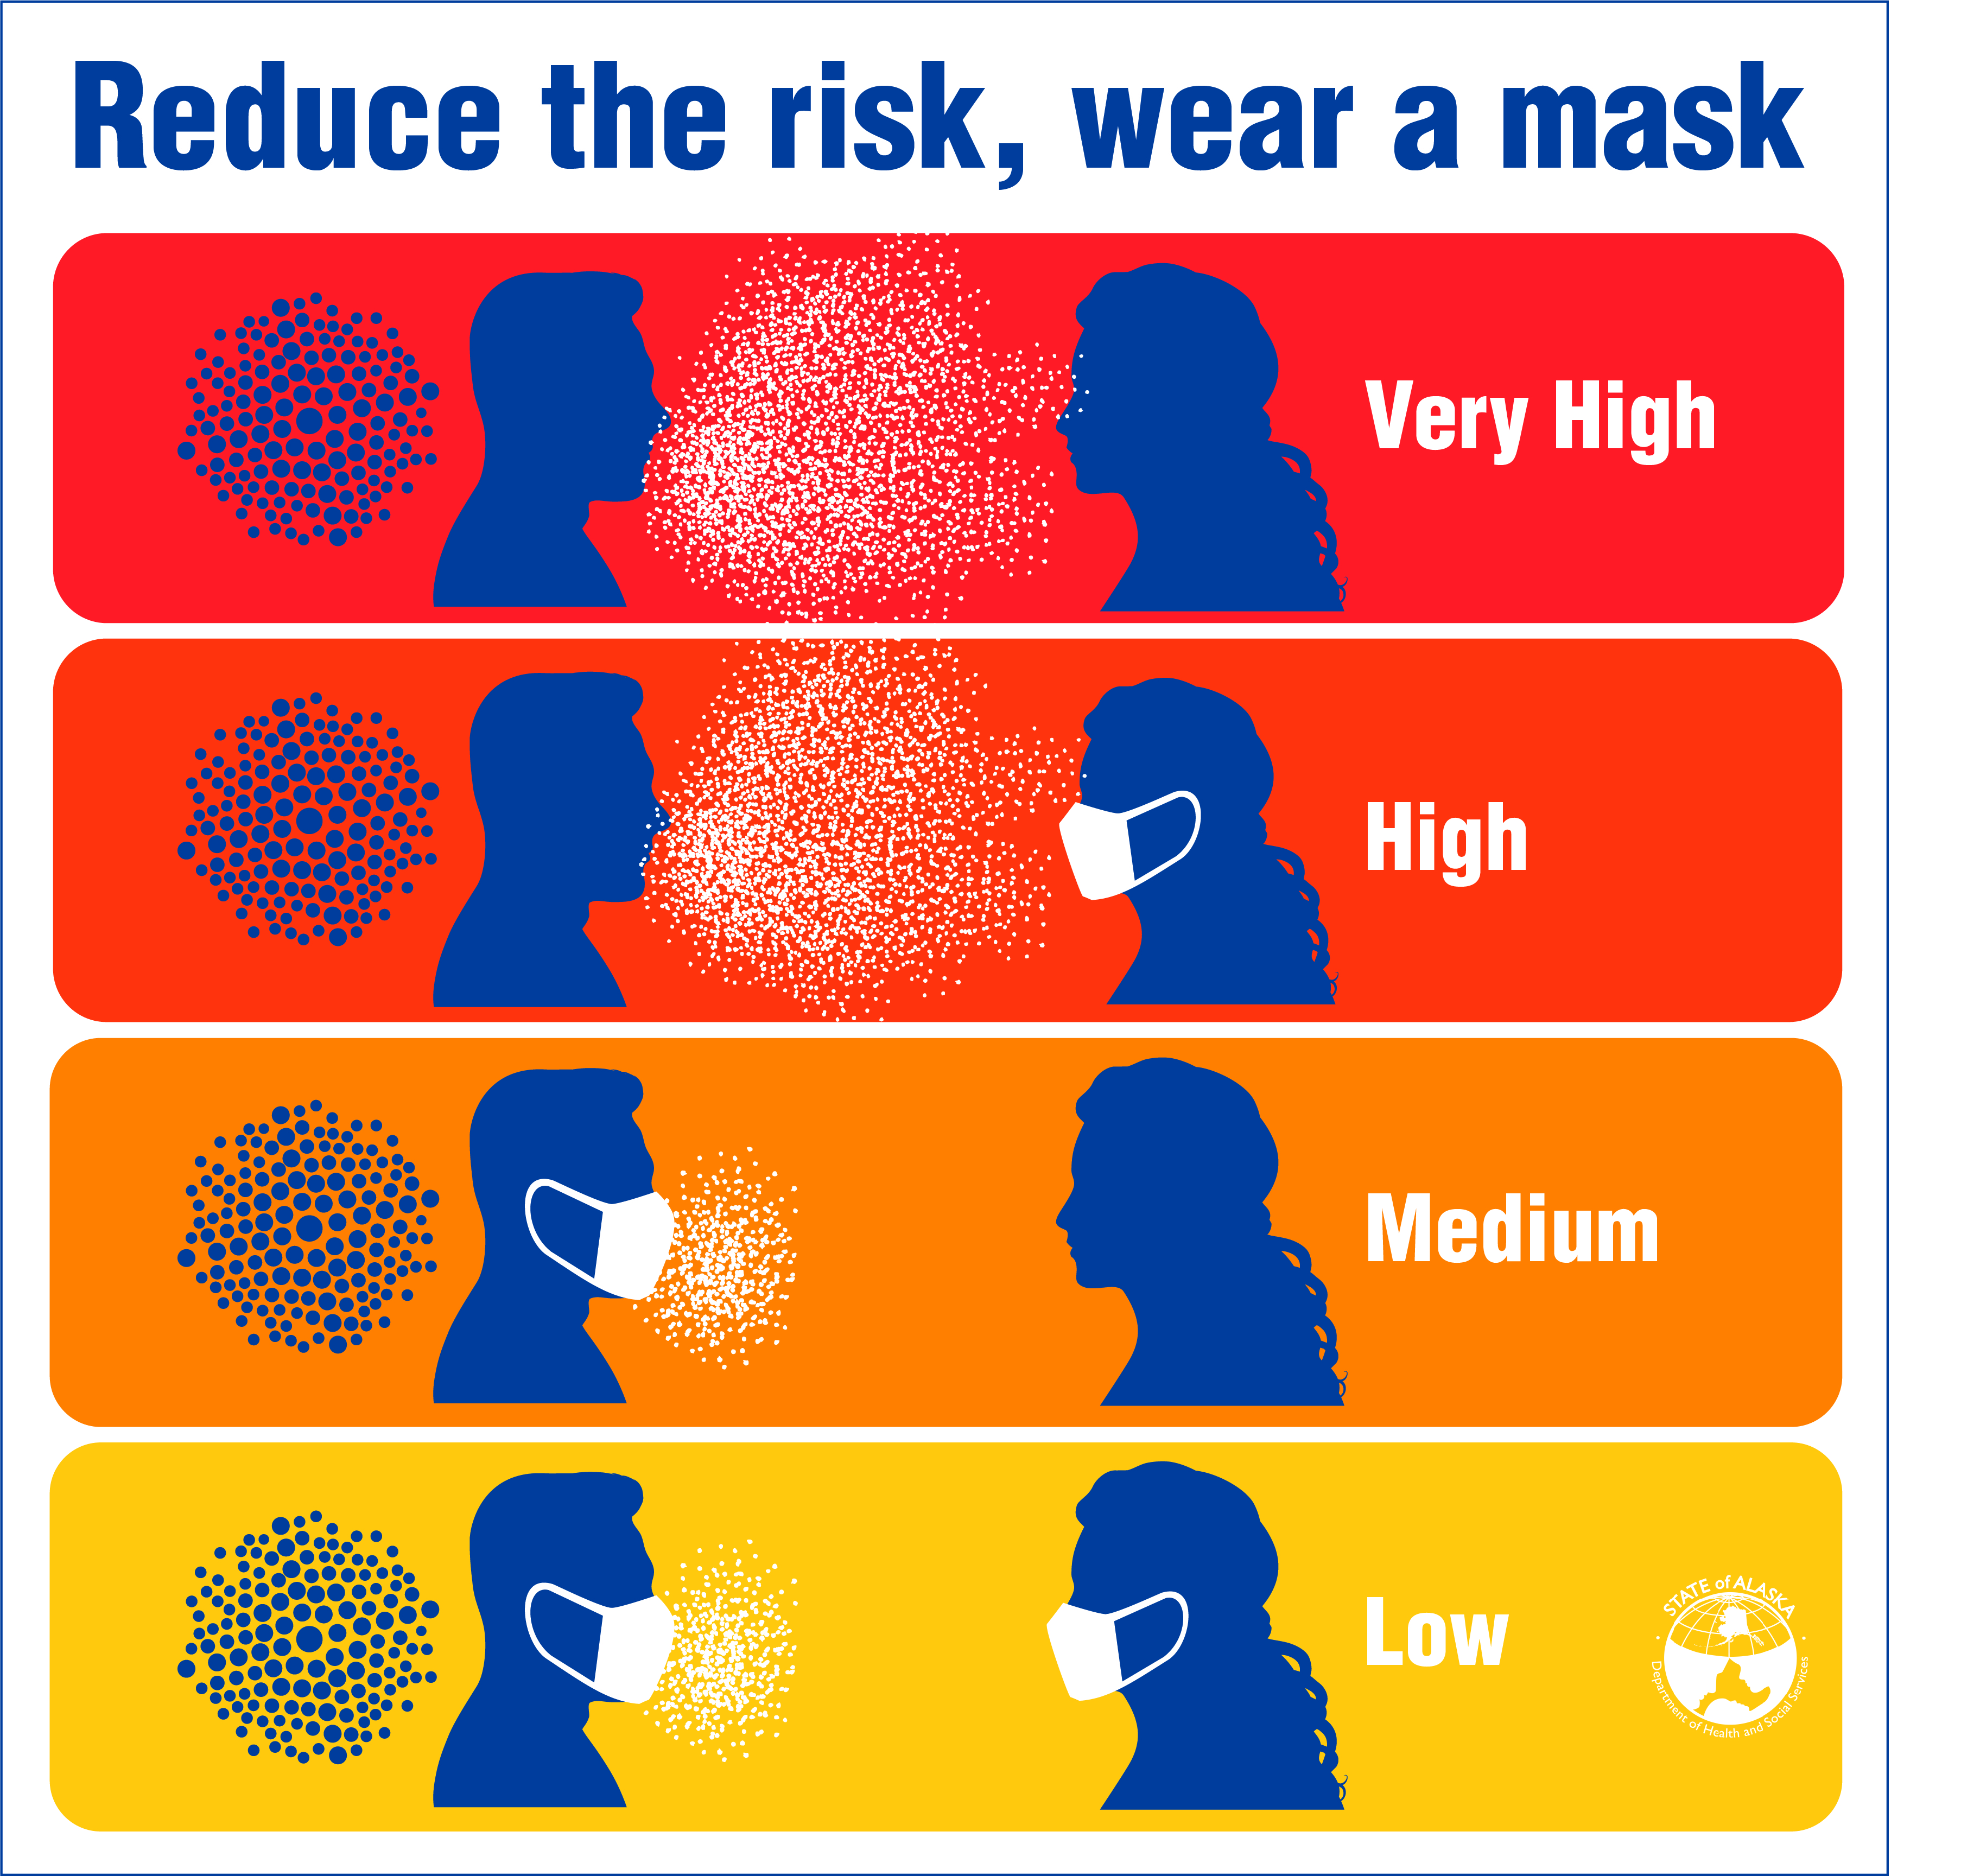 Reduce your chance of spreading COVID by wearing a mask.